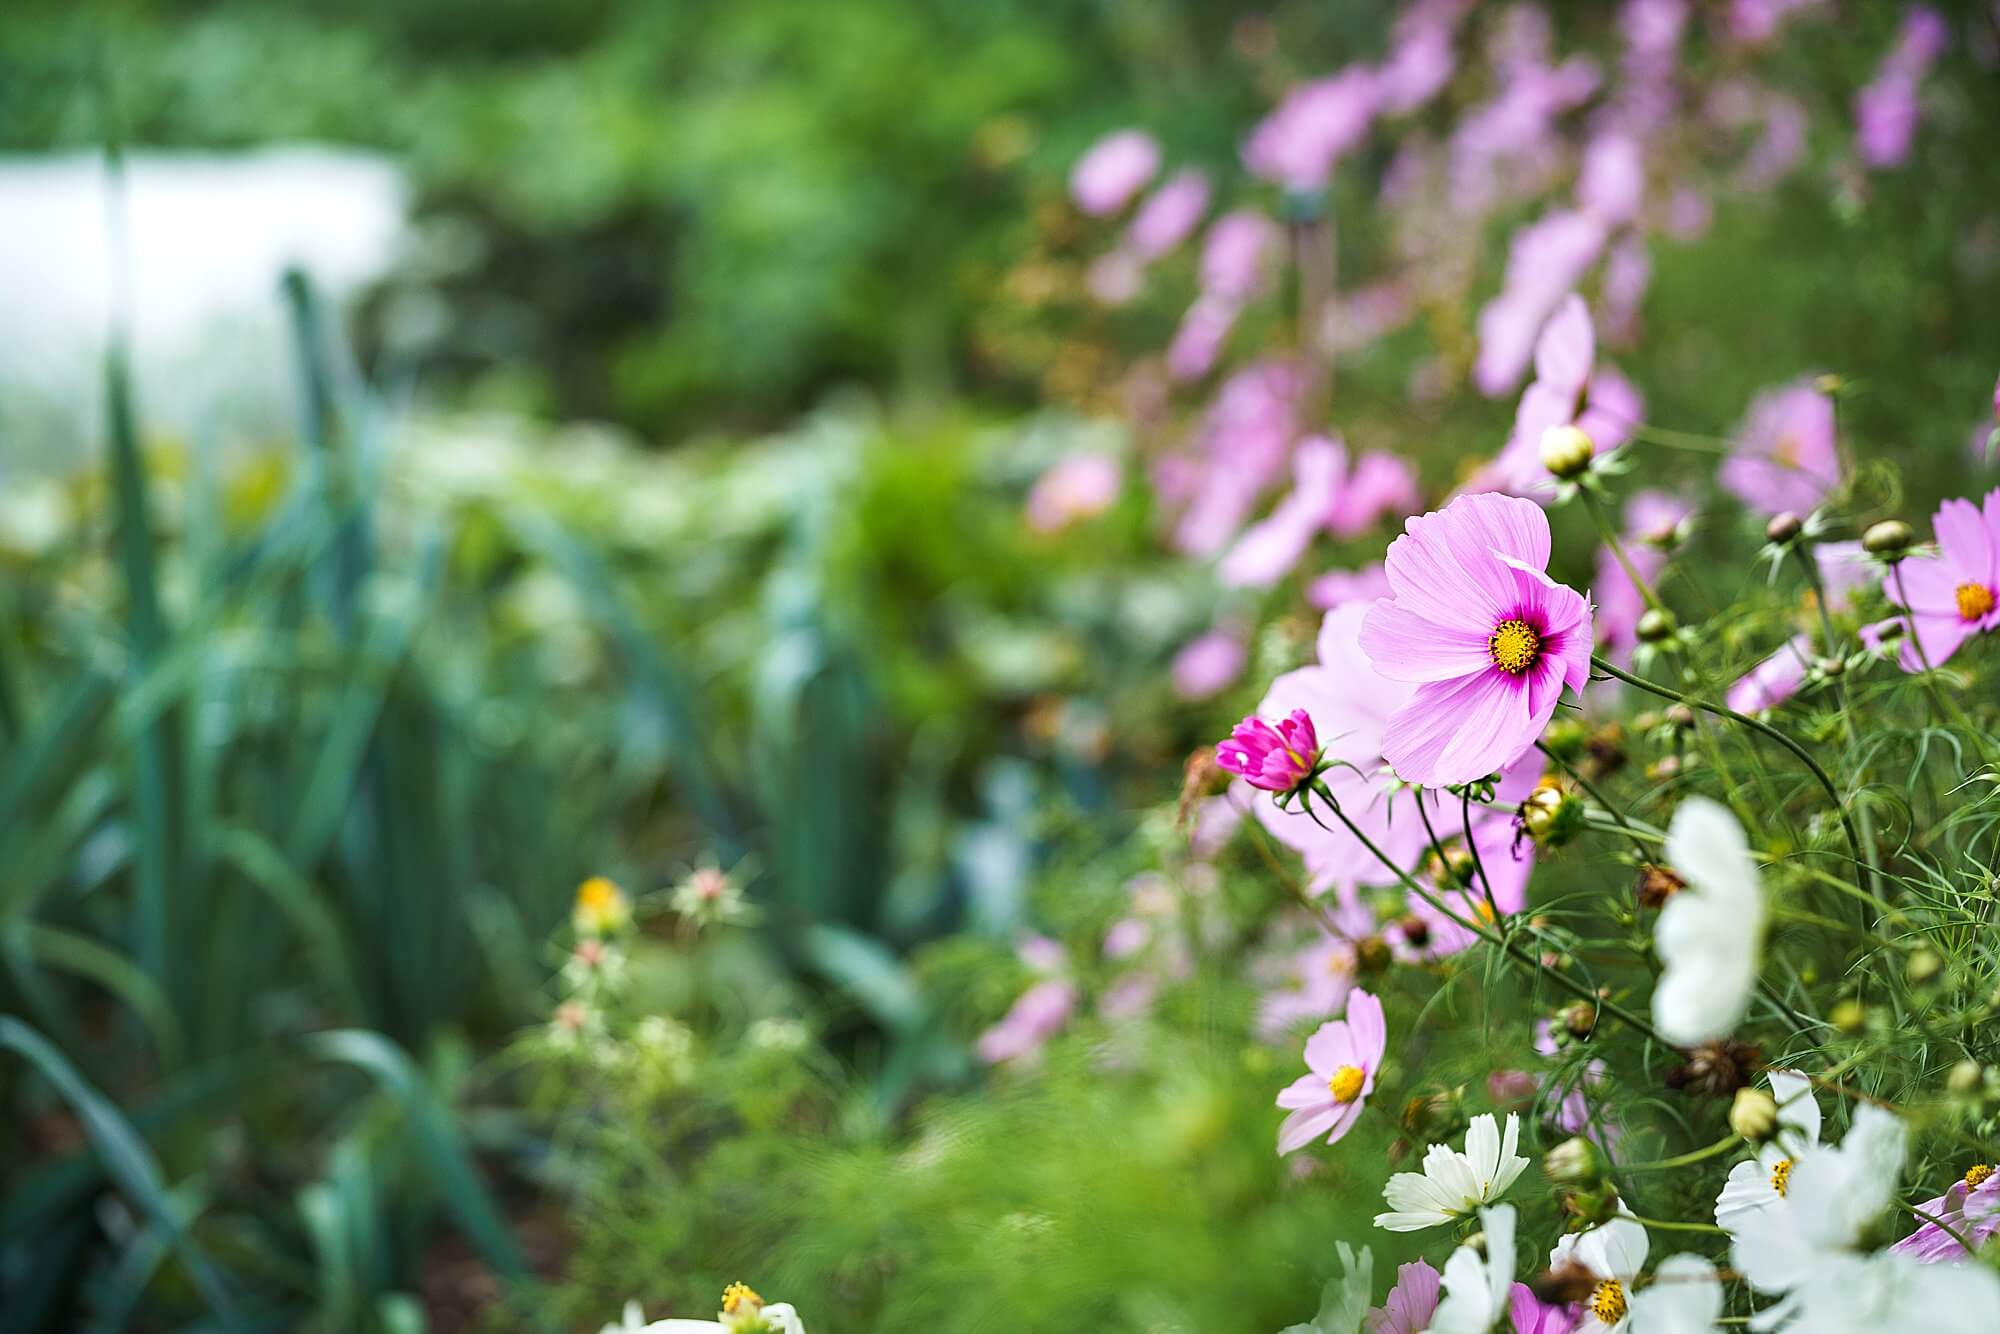 companion planting in a vegetable garden with pink and white cosmos